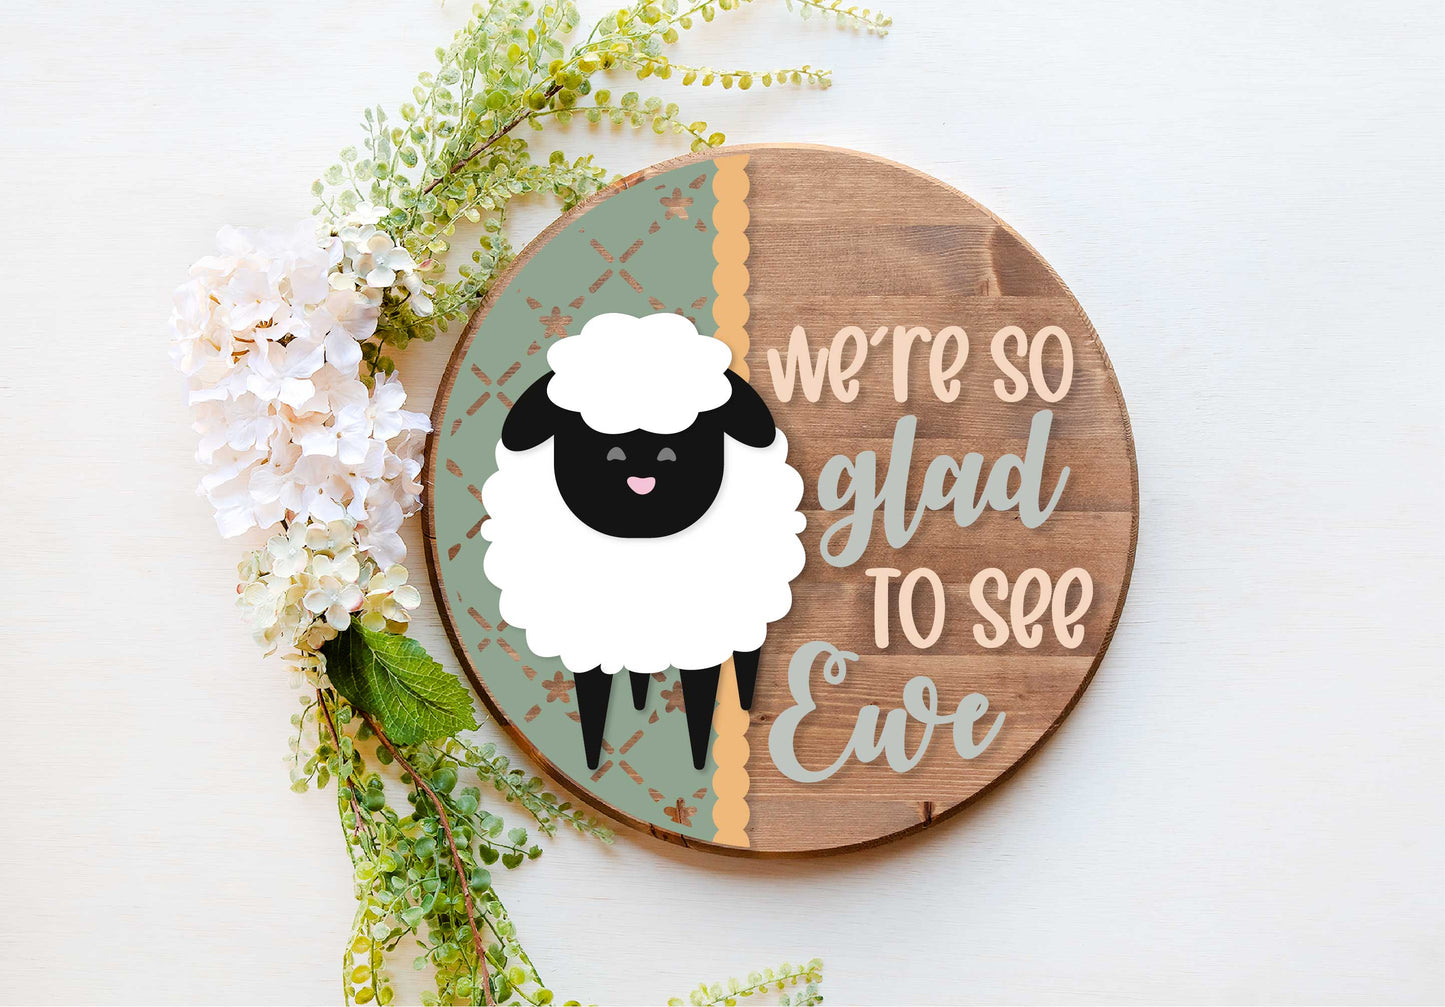 We're so glad to see Ewe sheep sign